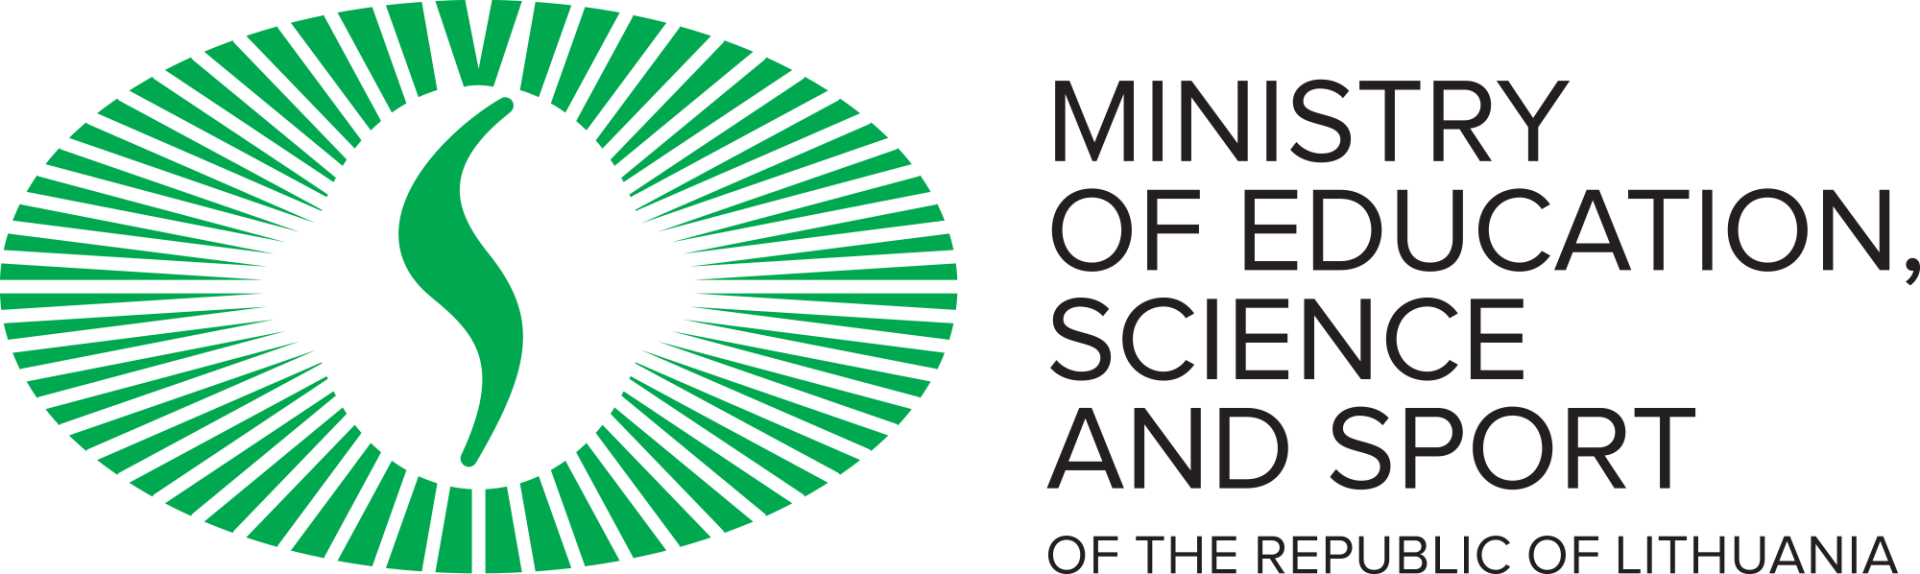 Ministry of Science logo